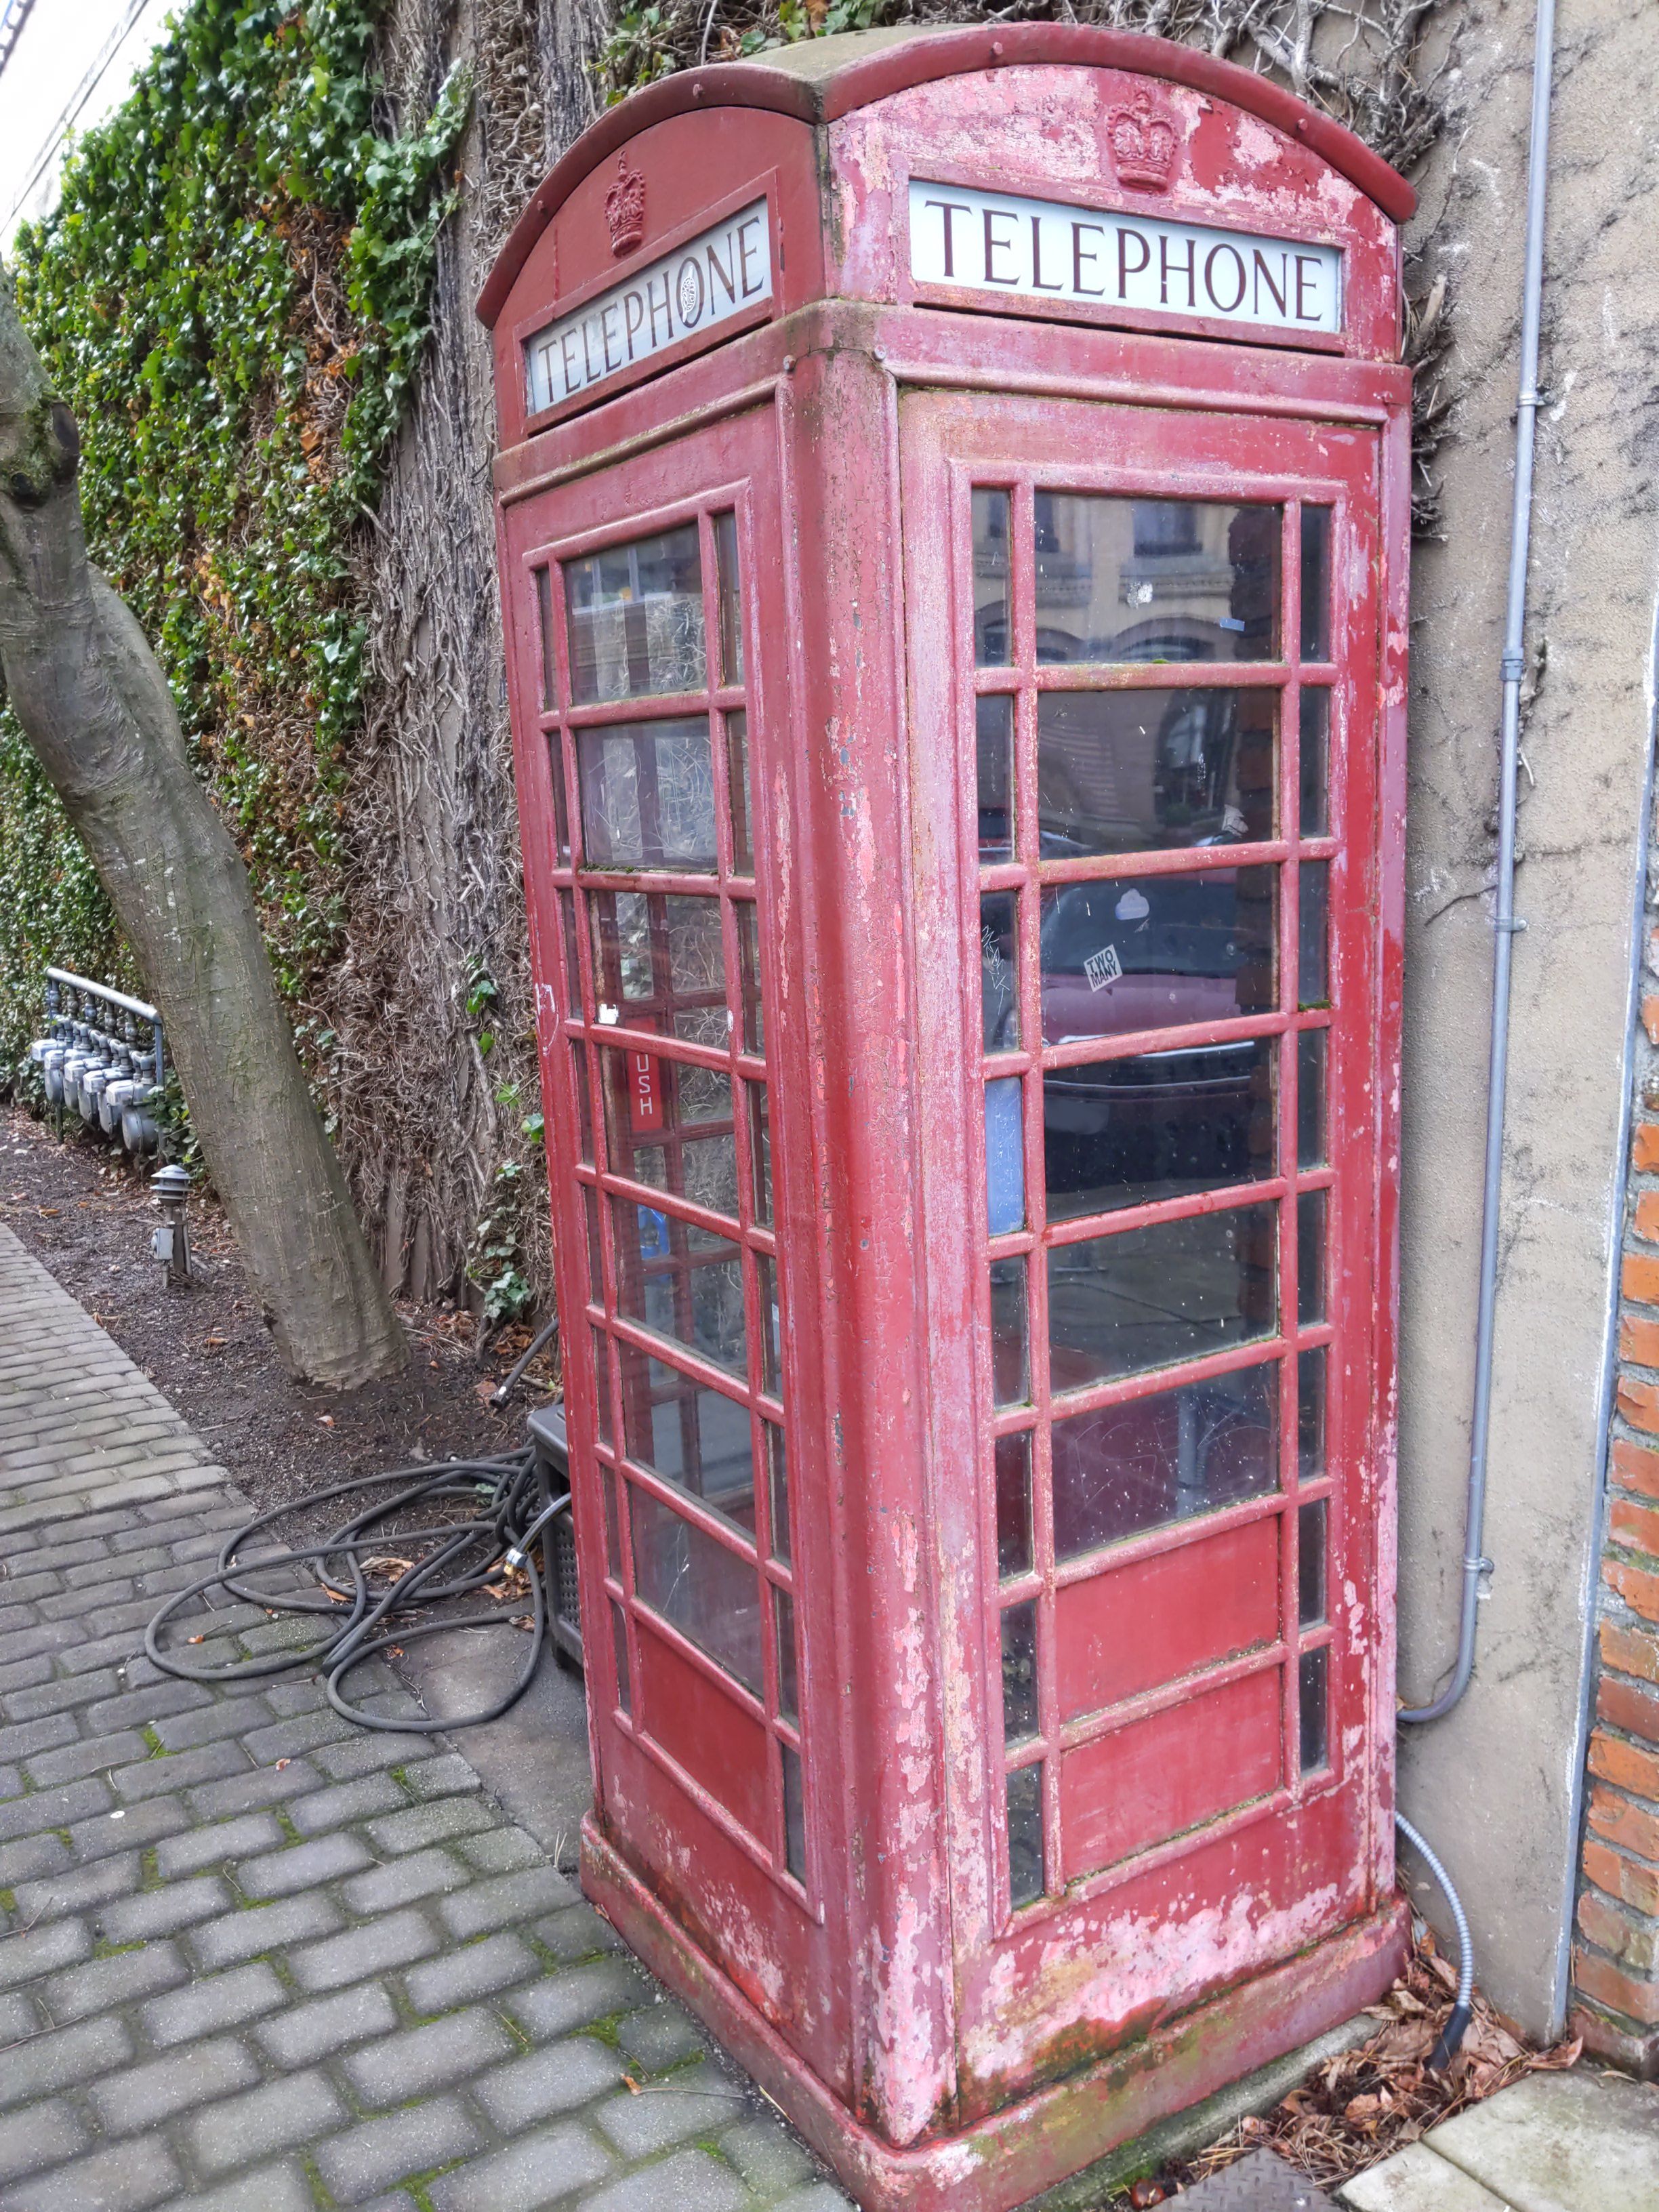 An old, red telephone booth